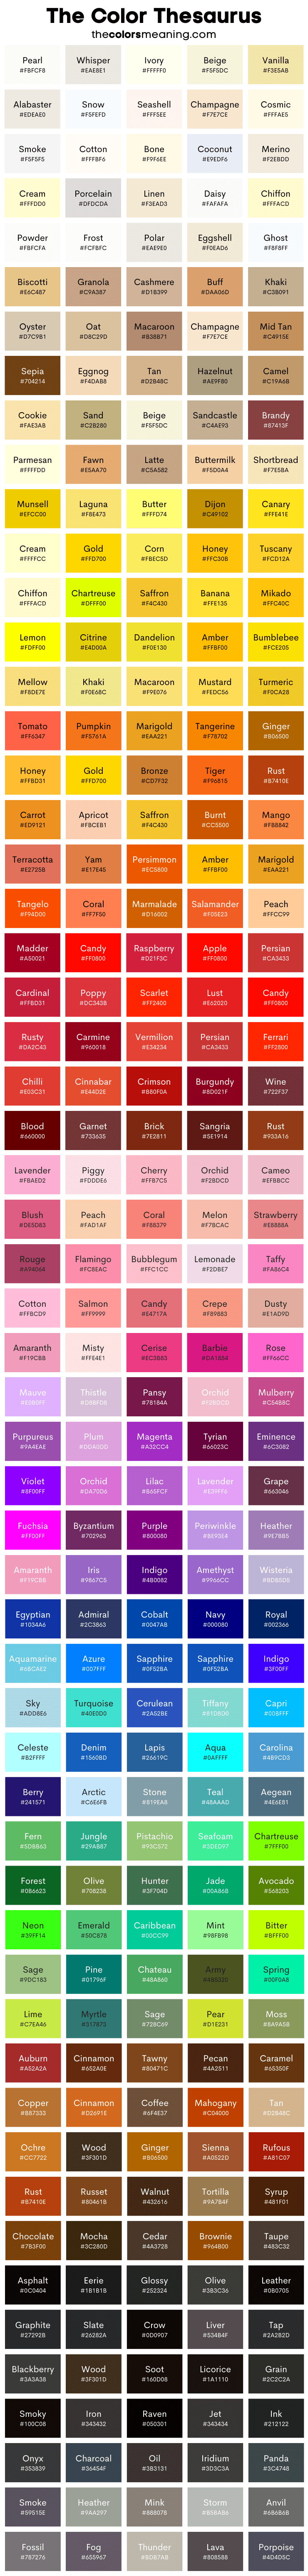 color names infographic